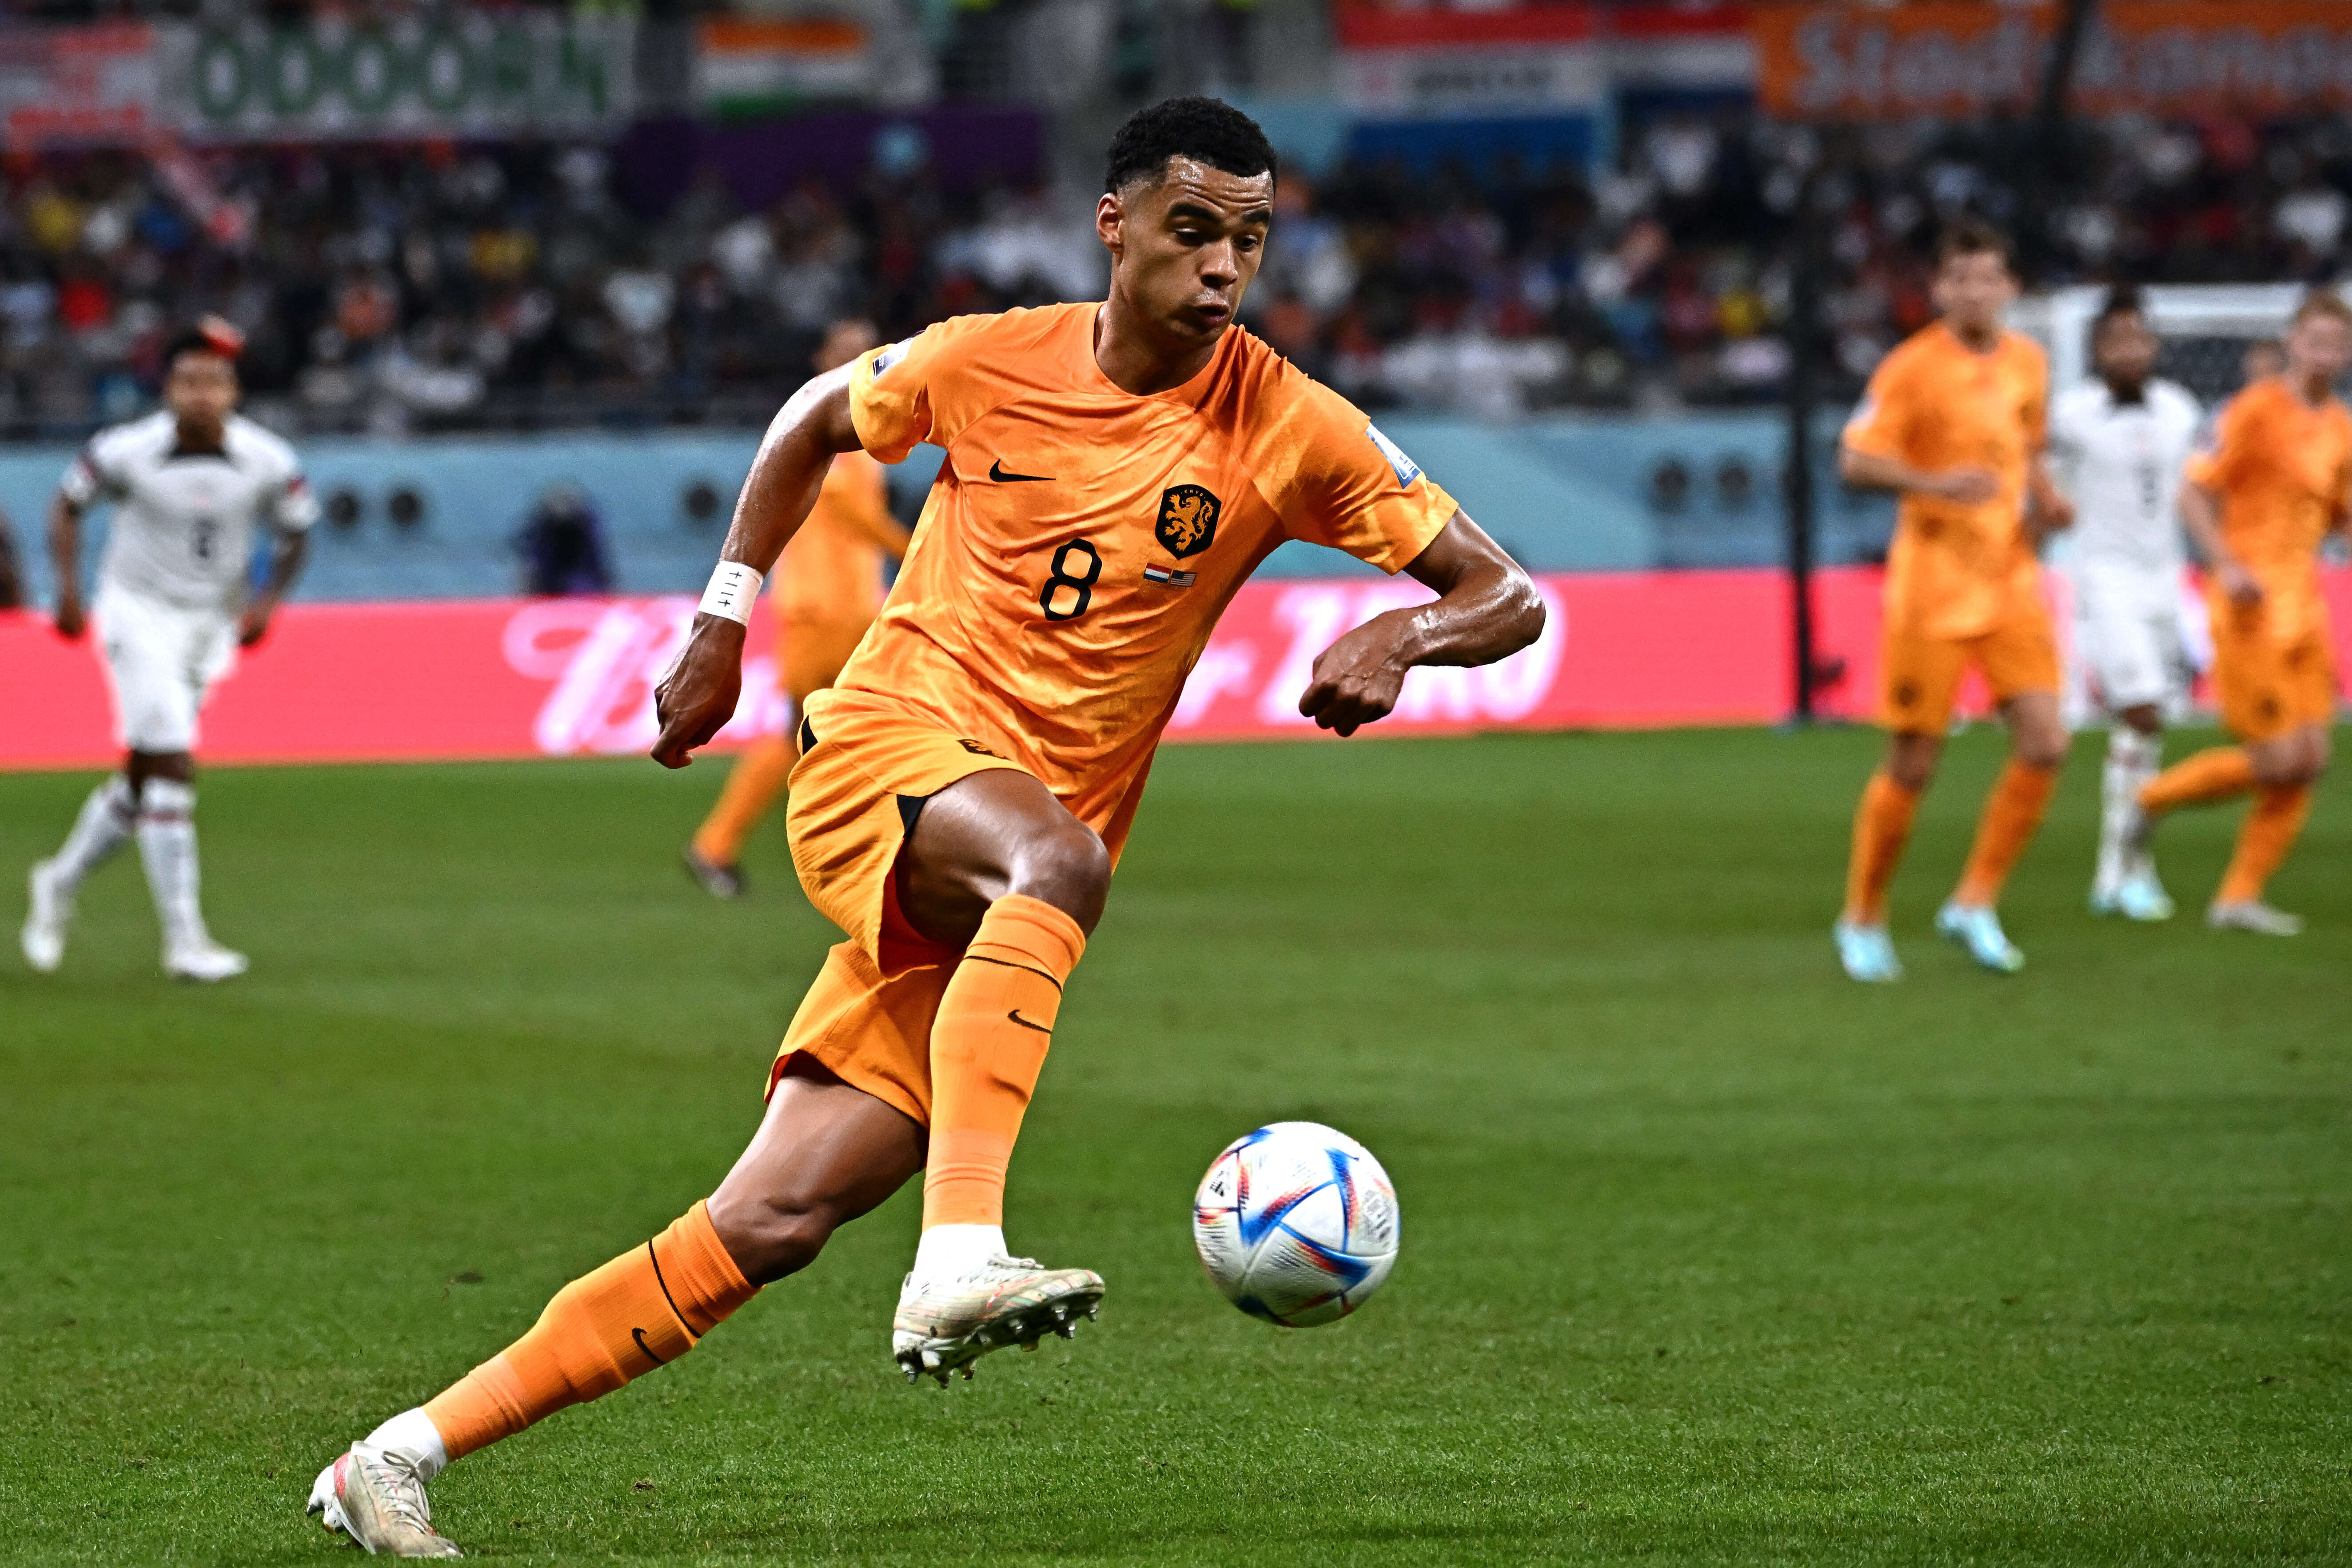 Netherlands' forward #08 Cody Gakpo runs with the ball during the Qatar 2022 World Cup round of 16 football match between the Netherlands and USA at Khalifa International Stadium in Doha on December 3, 2022. (Photo by Anne-Christine POUJOULAT / AFP)